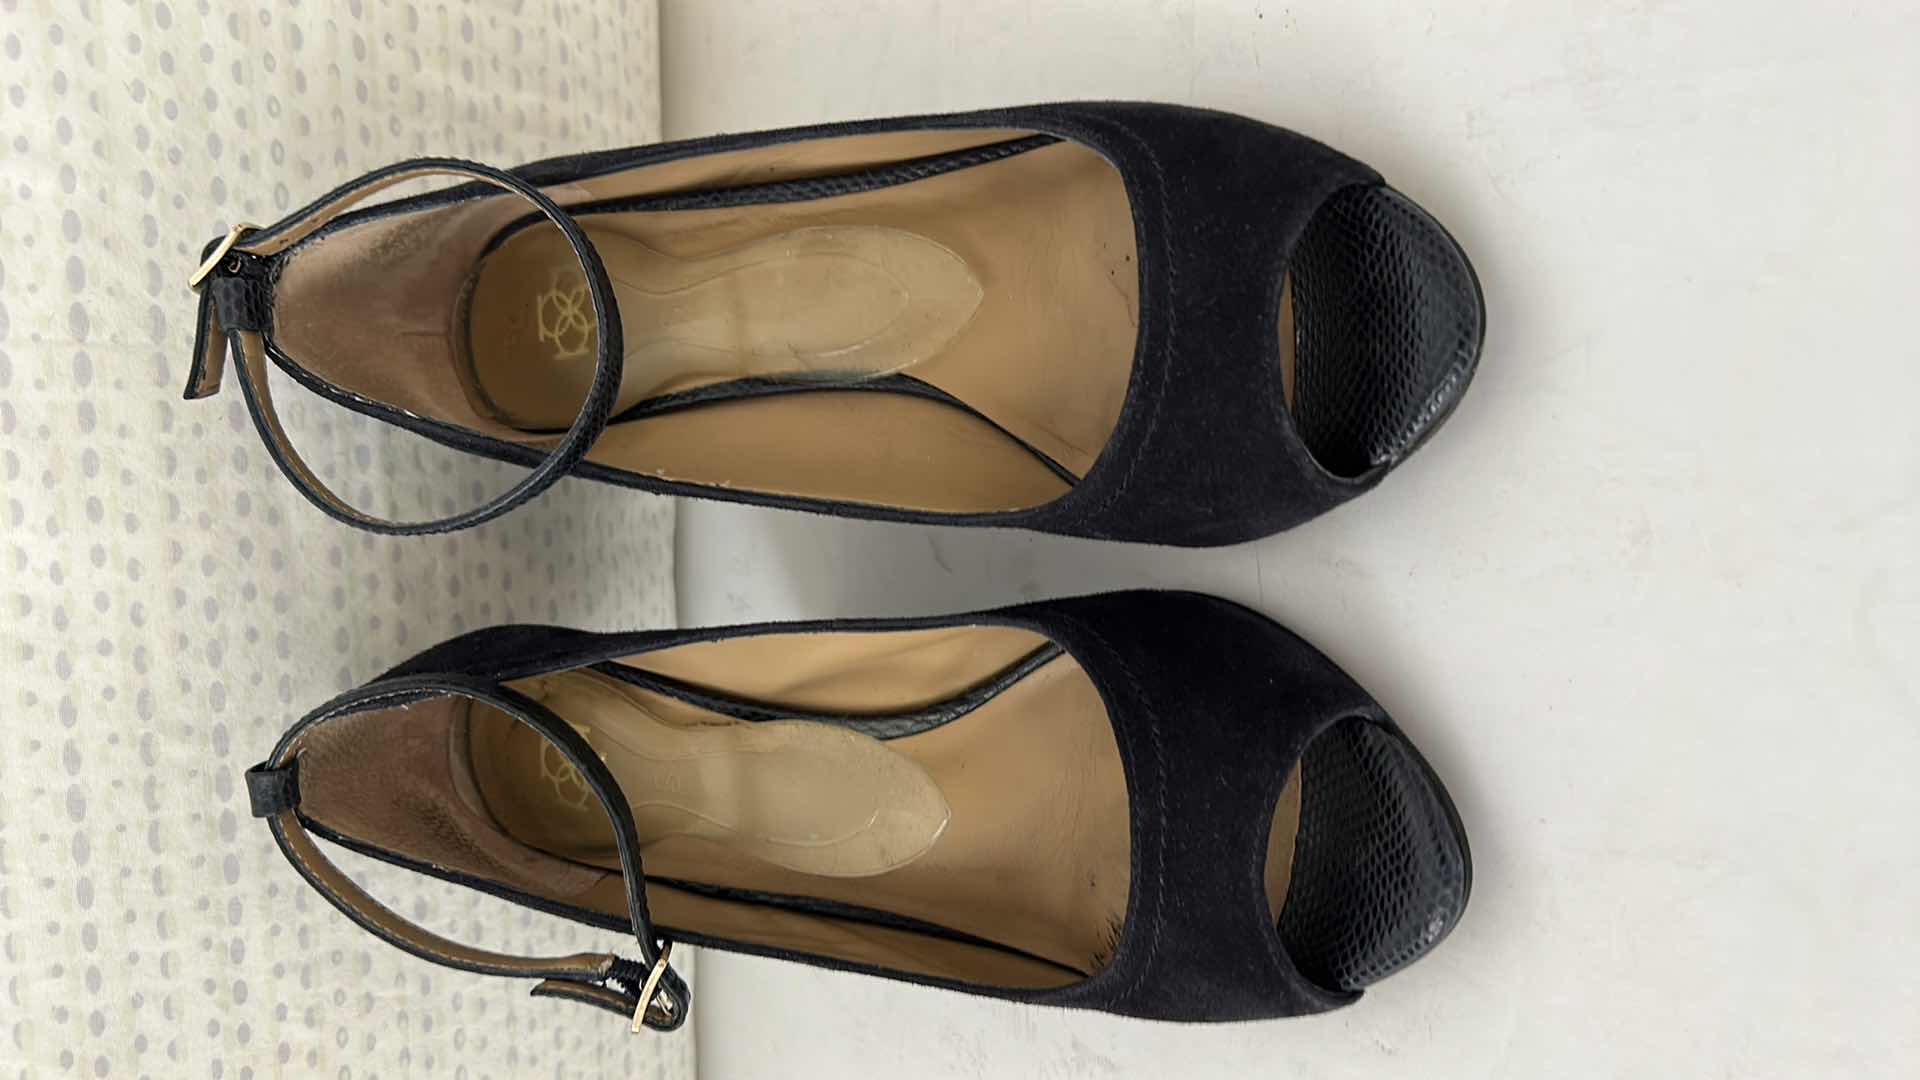 Photo 5 of 2 PAIR WOMENS SHOES MICHAEL KORS SIZE 7 AND ANN TAYLOR SIZE 6.5